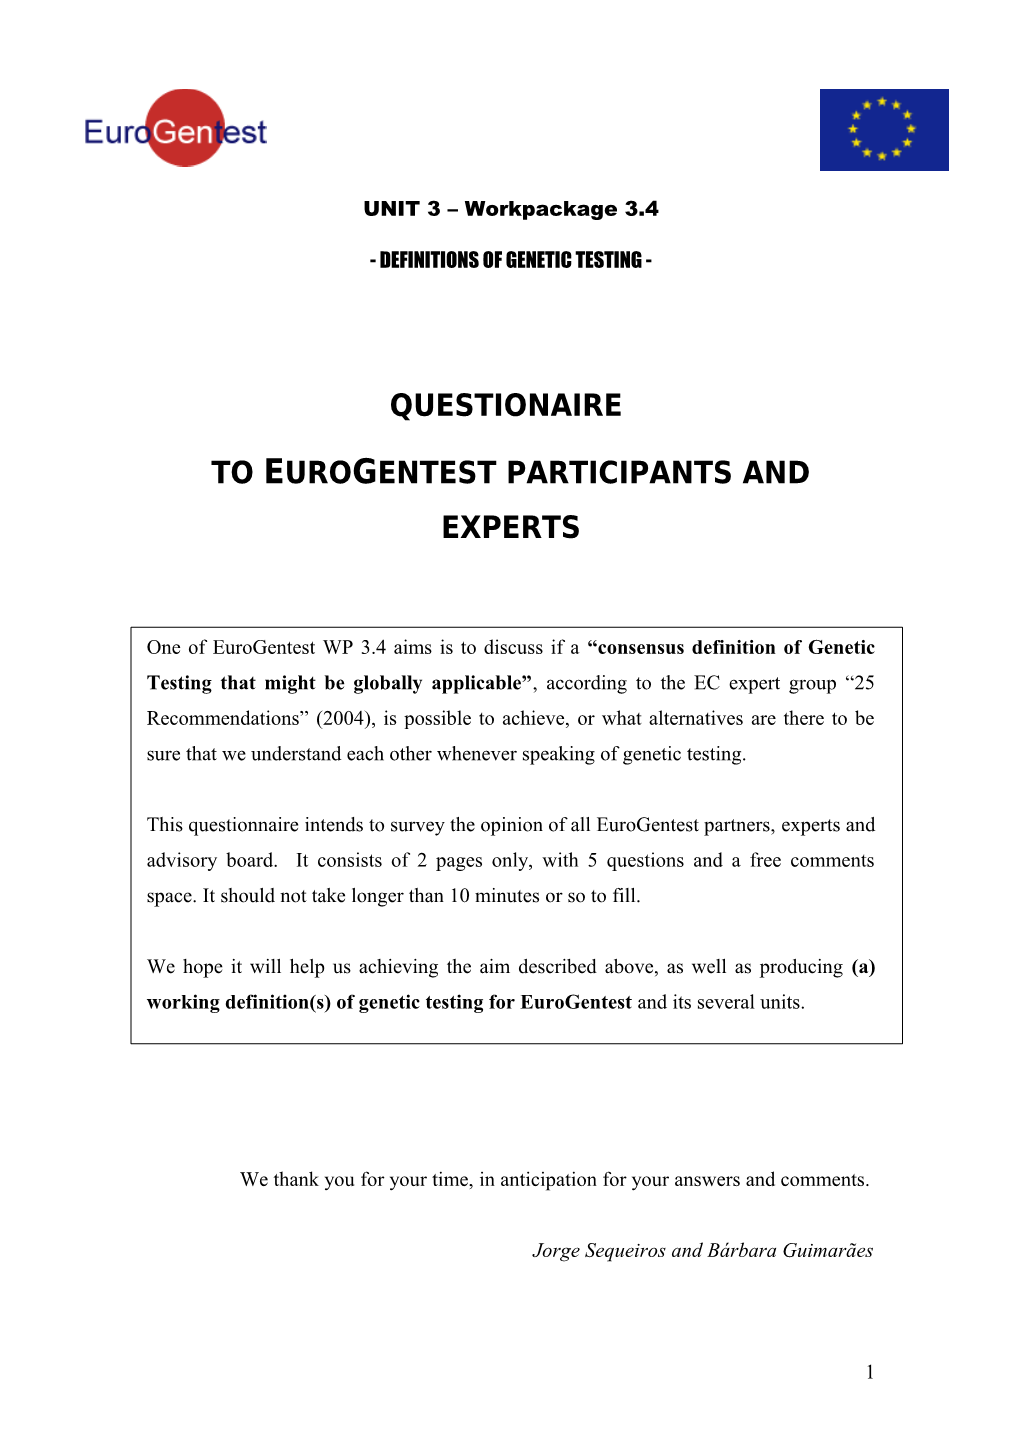 To Eurogentest Participants and Experts